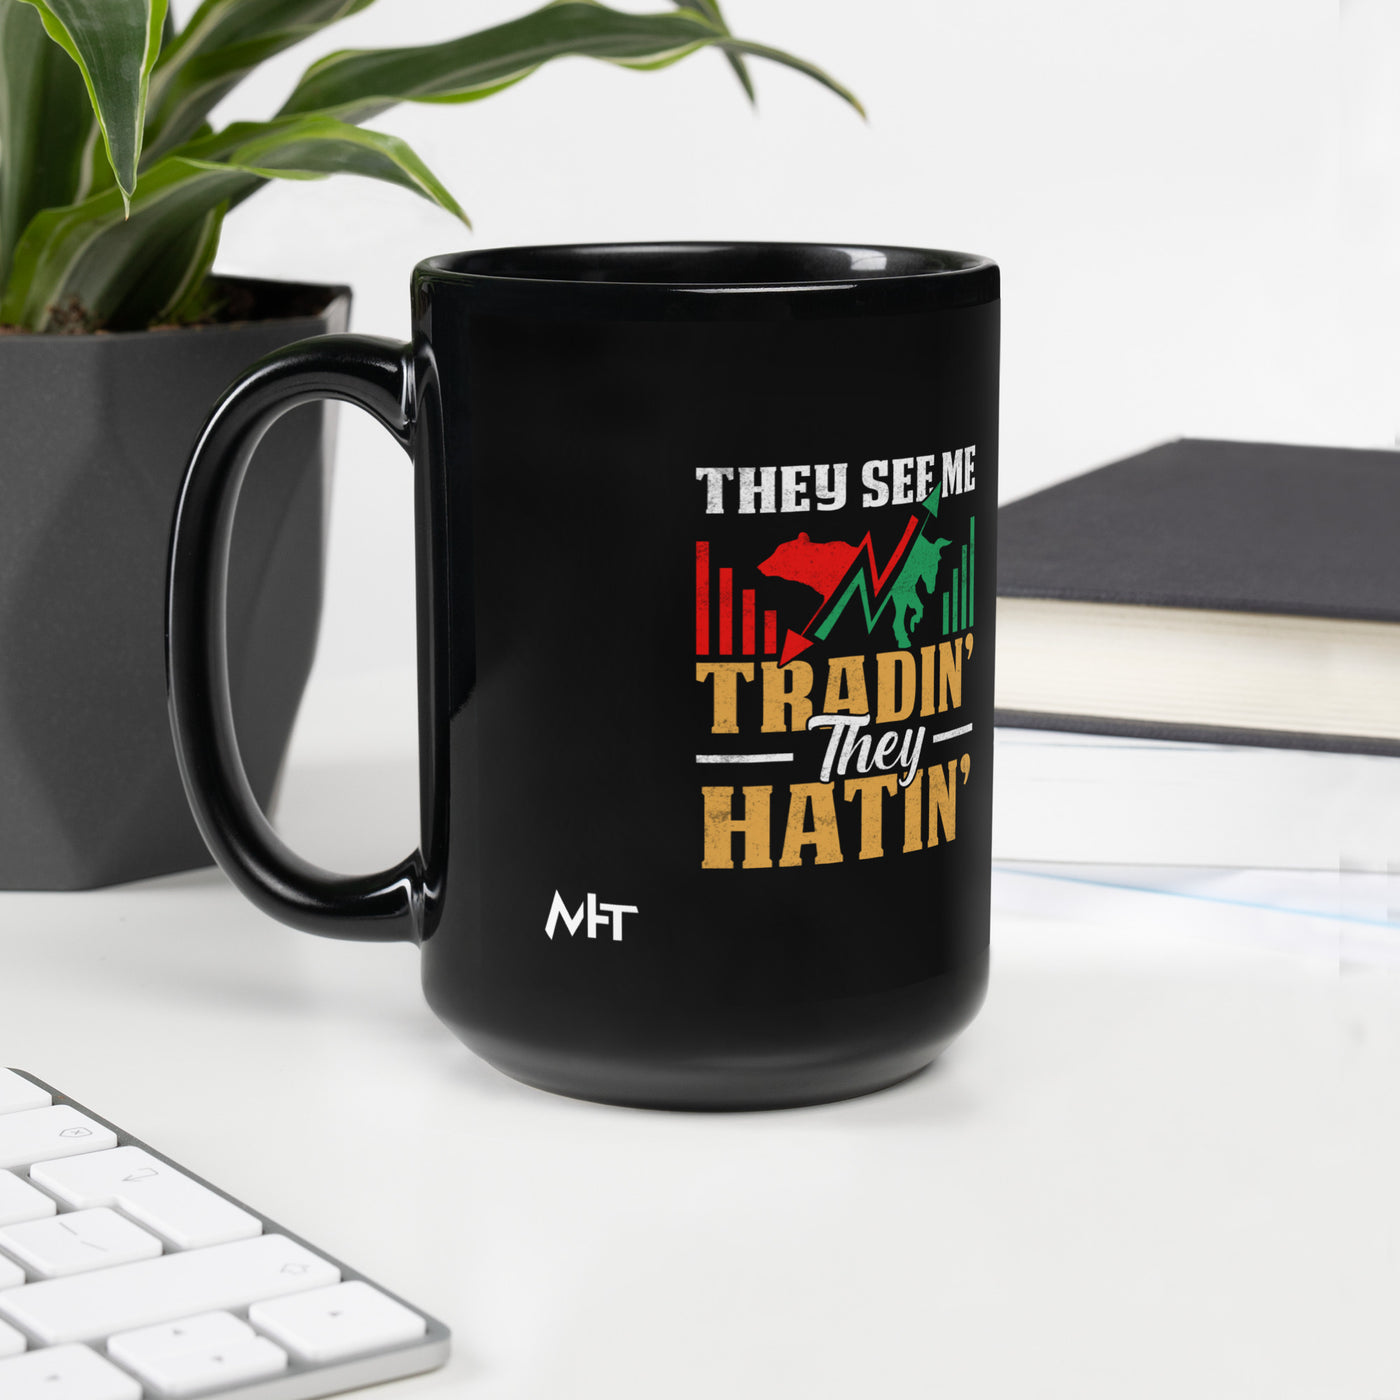 They See me Trading, they Hating - Black Glossy Mug